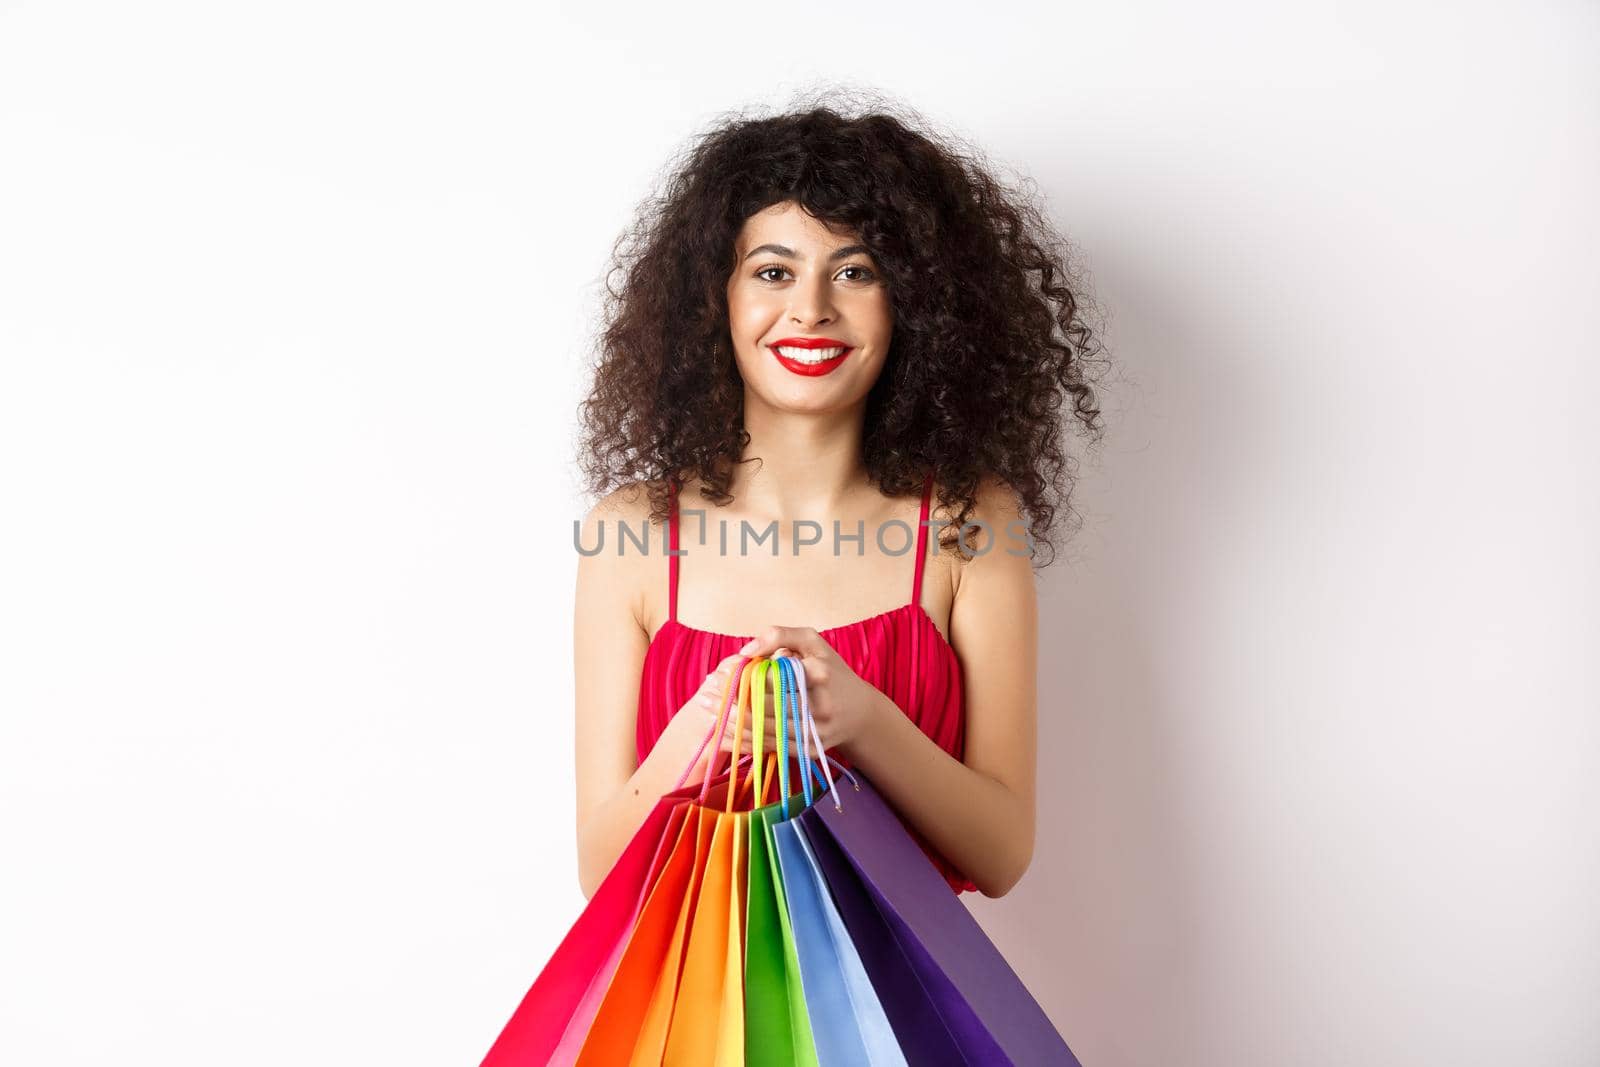 Image of stylish caucasian woman in red dress and makeup, holding shopping bags and smiling, standing over white background.